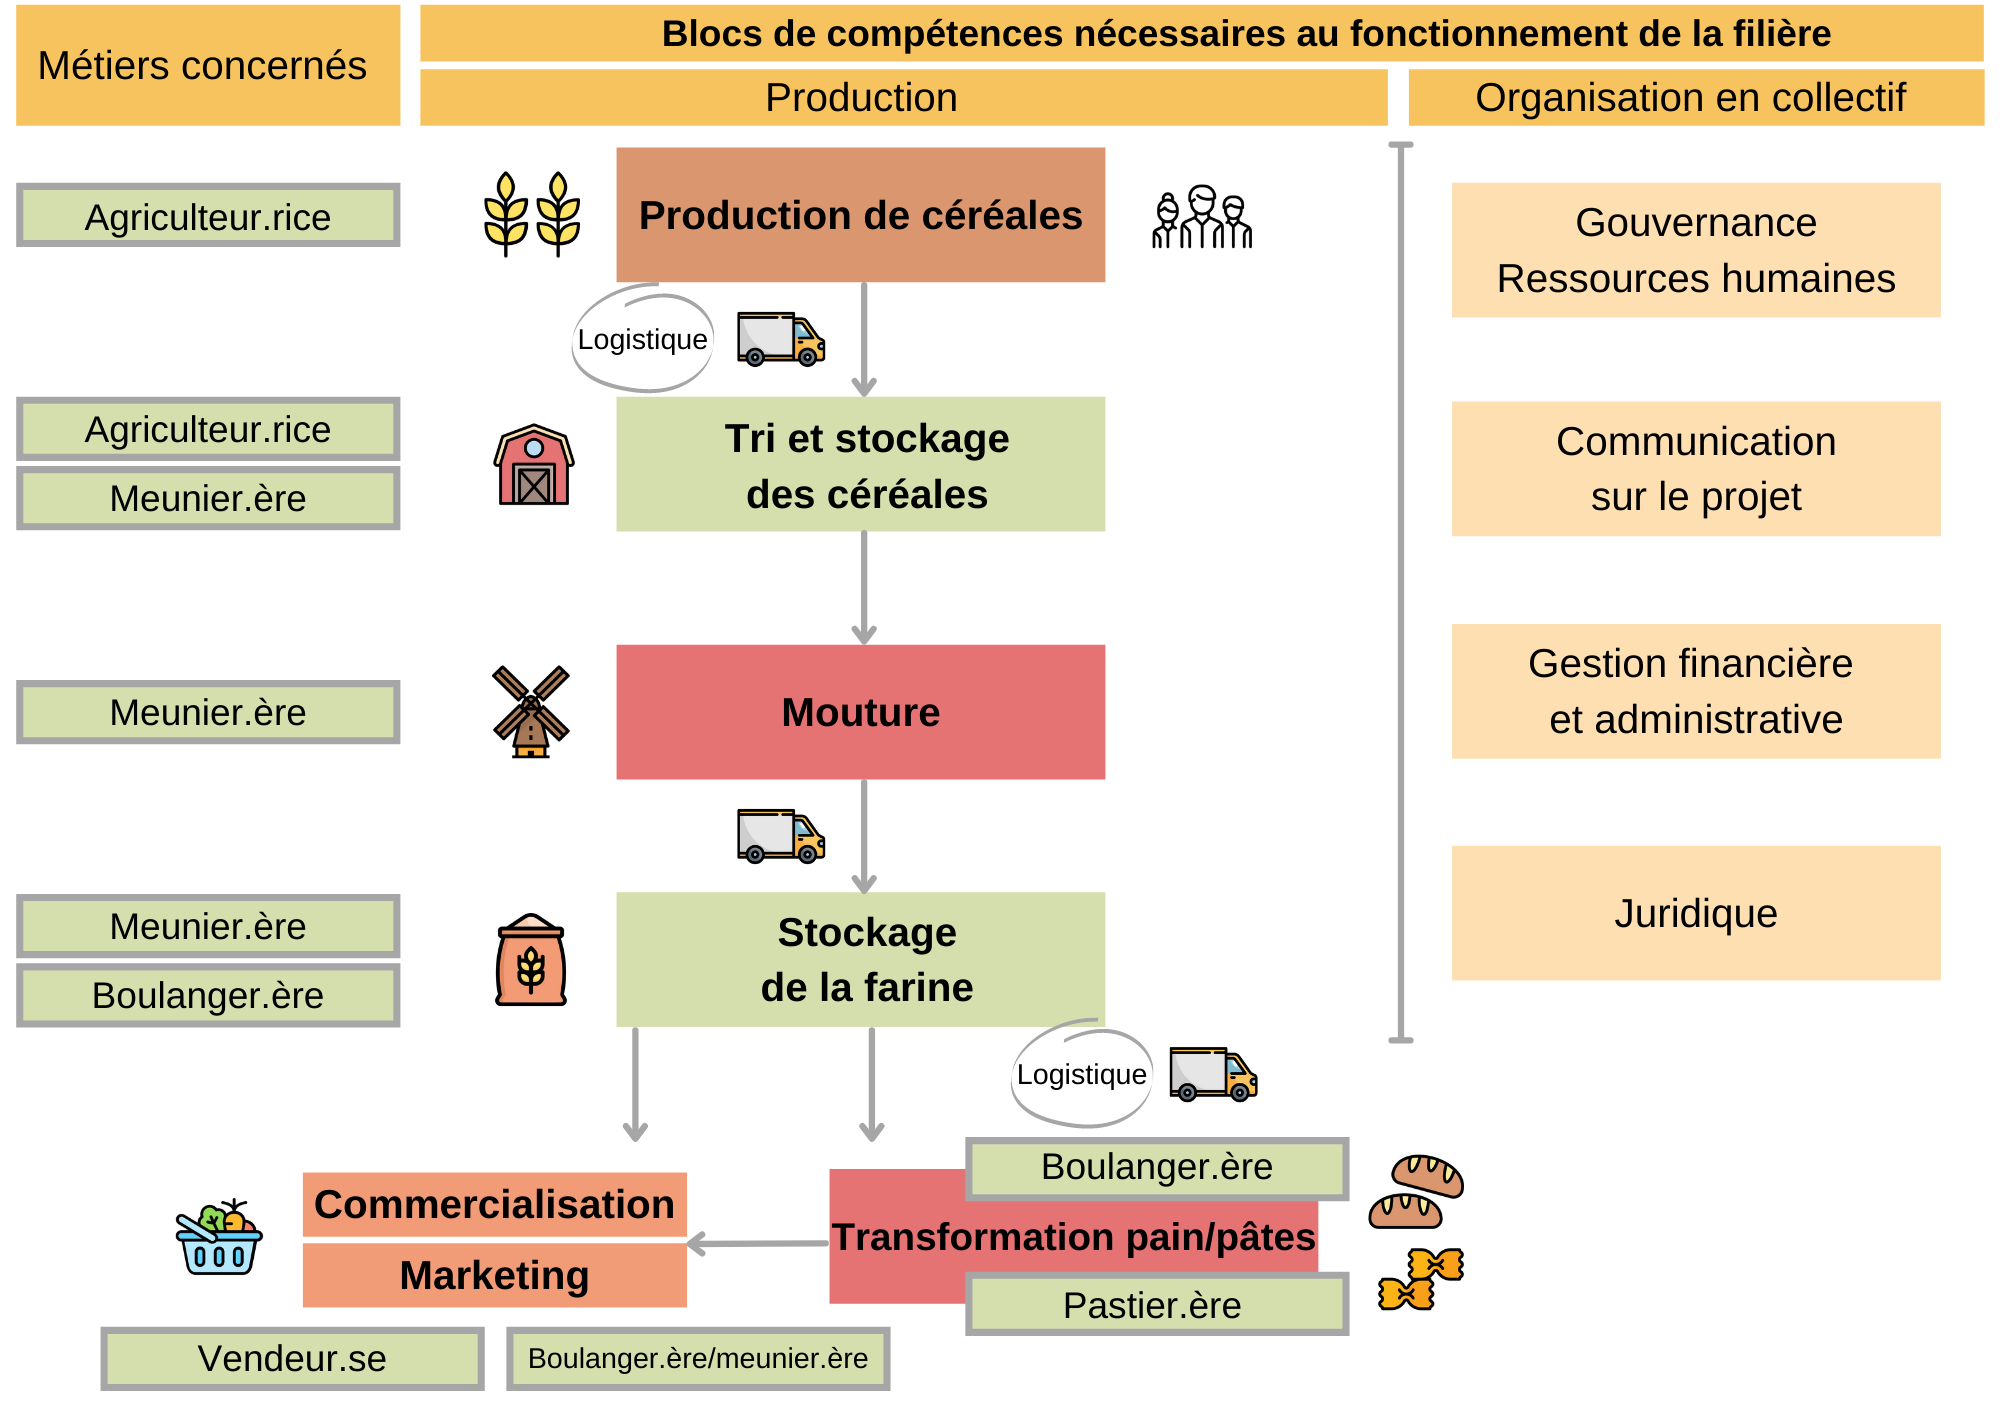 Schema_competencesmetiers.png (0.3MB)